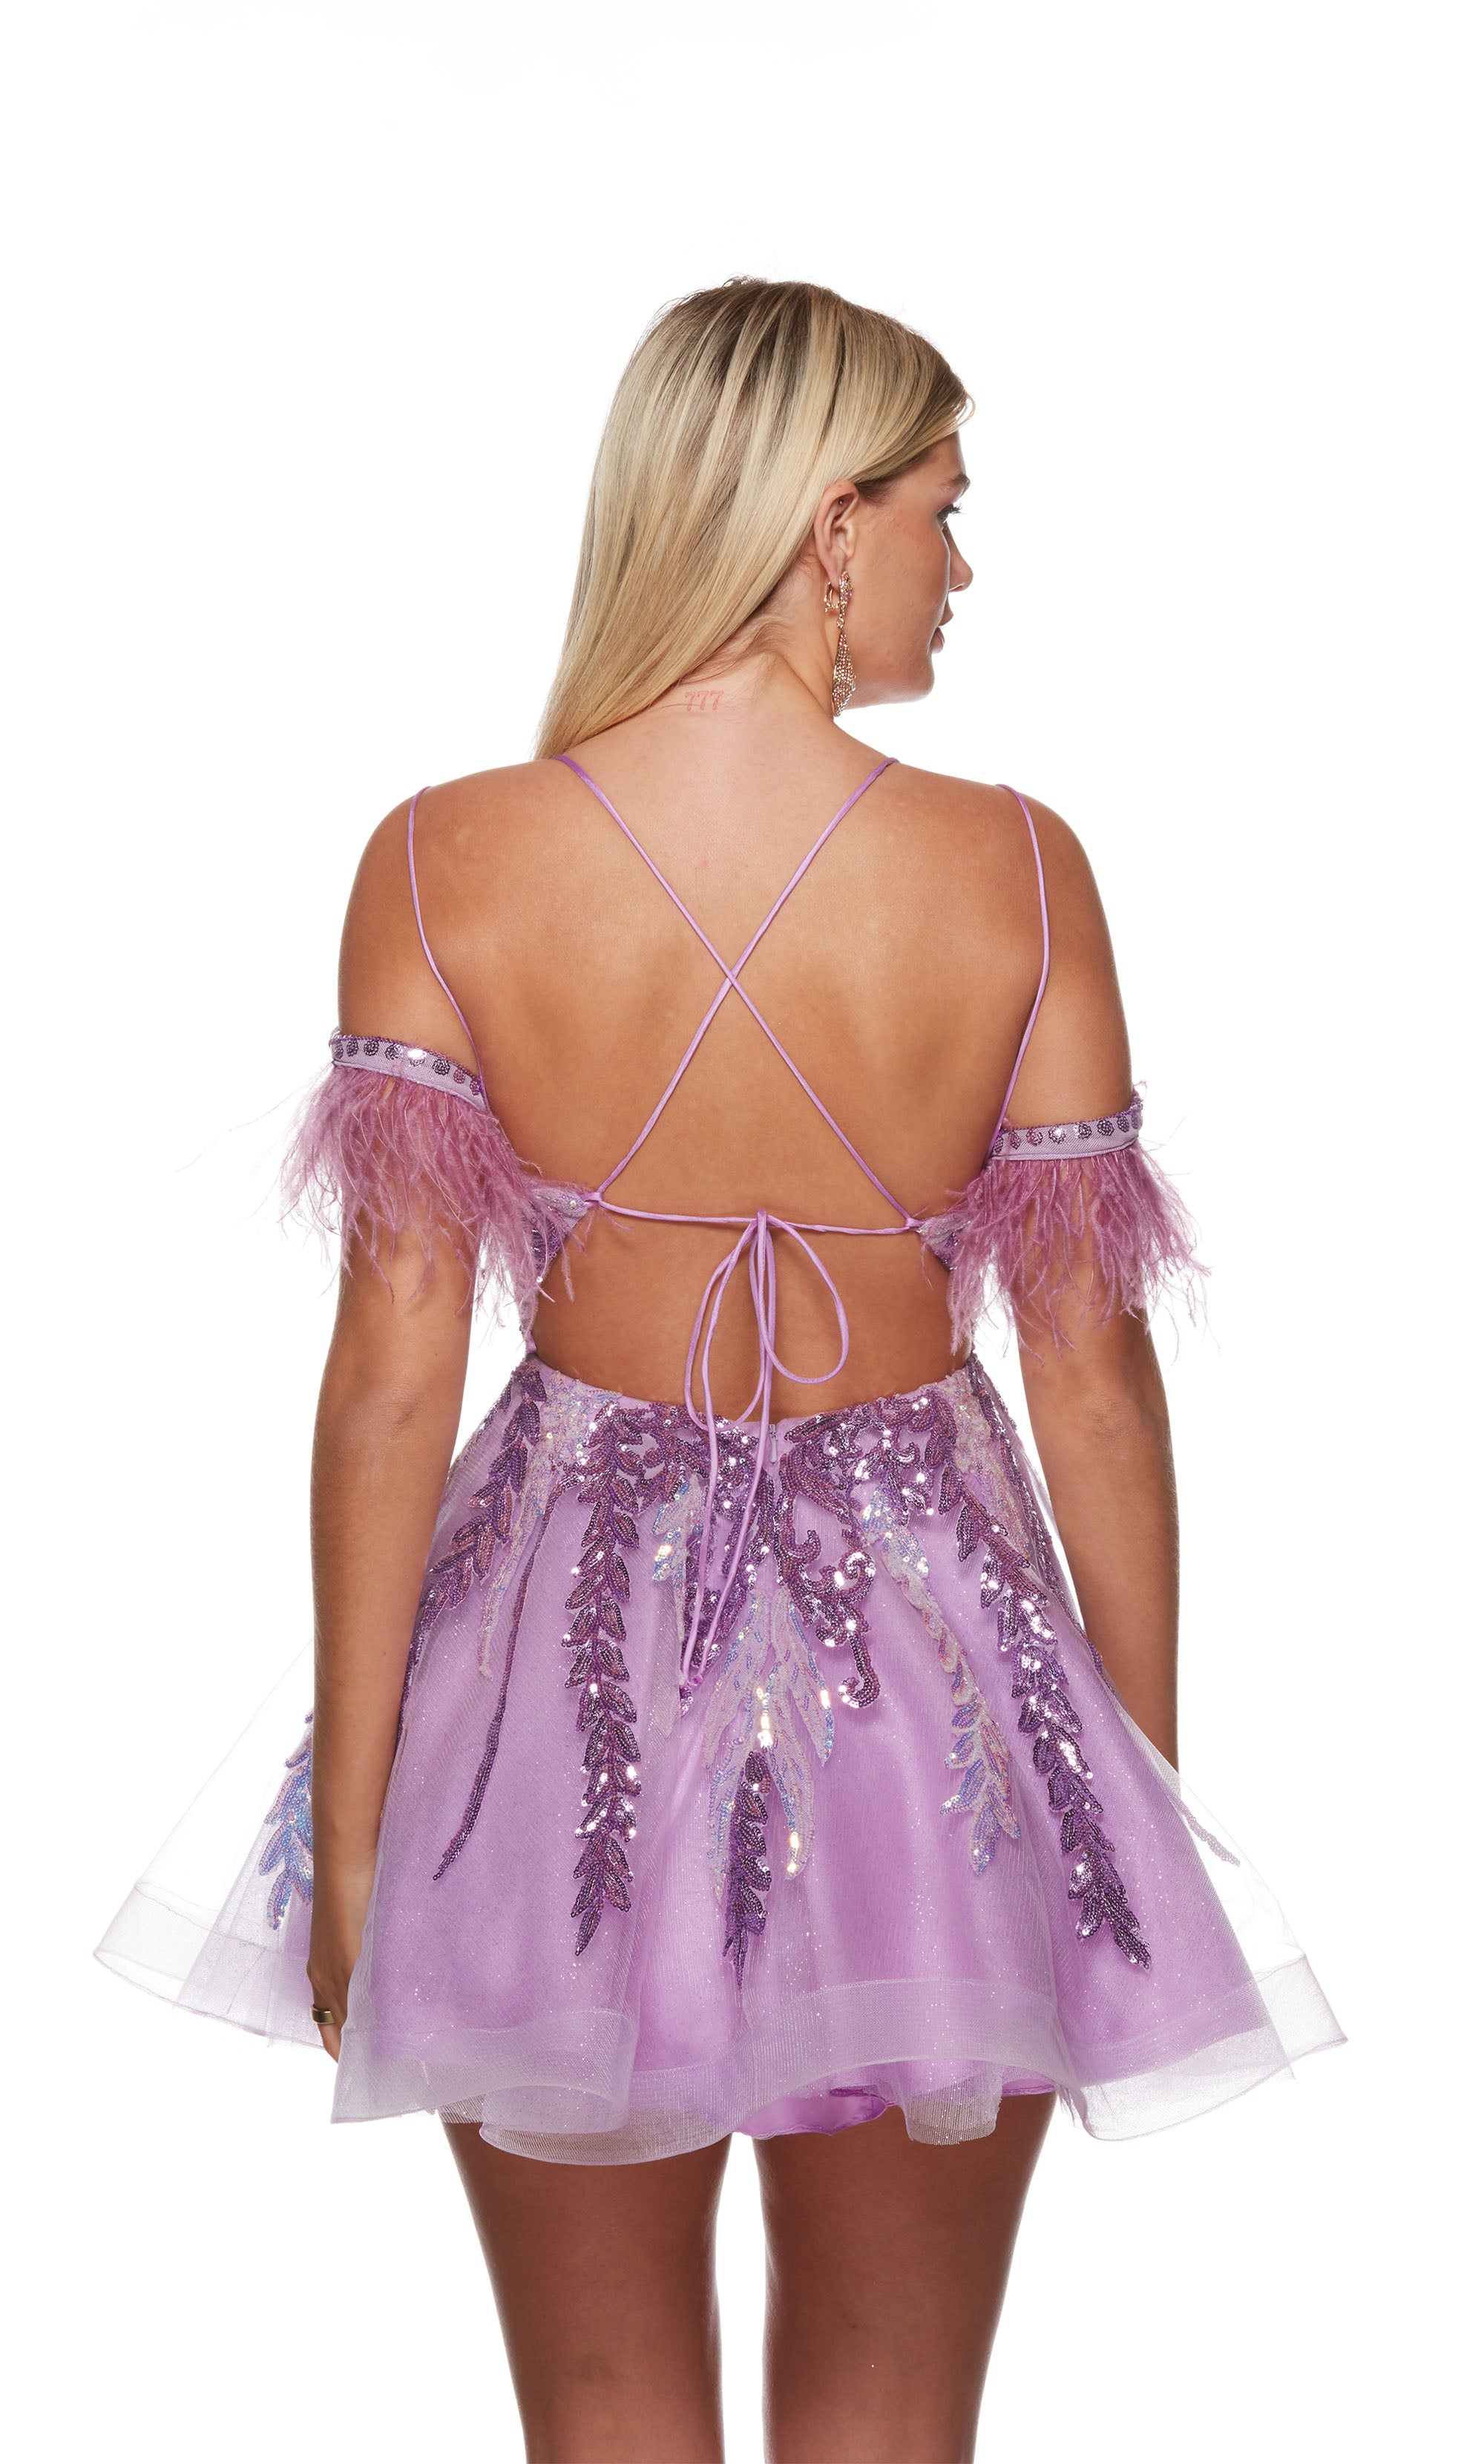 A fun and flouncy A-line dress with a plunging neckline, adorned with feather trim and multi-colored sequins for a touch of sparkle. The color is a vibrant lilac purple.